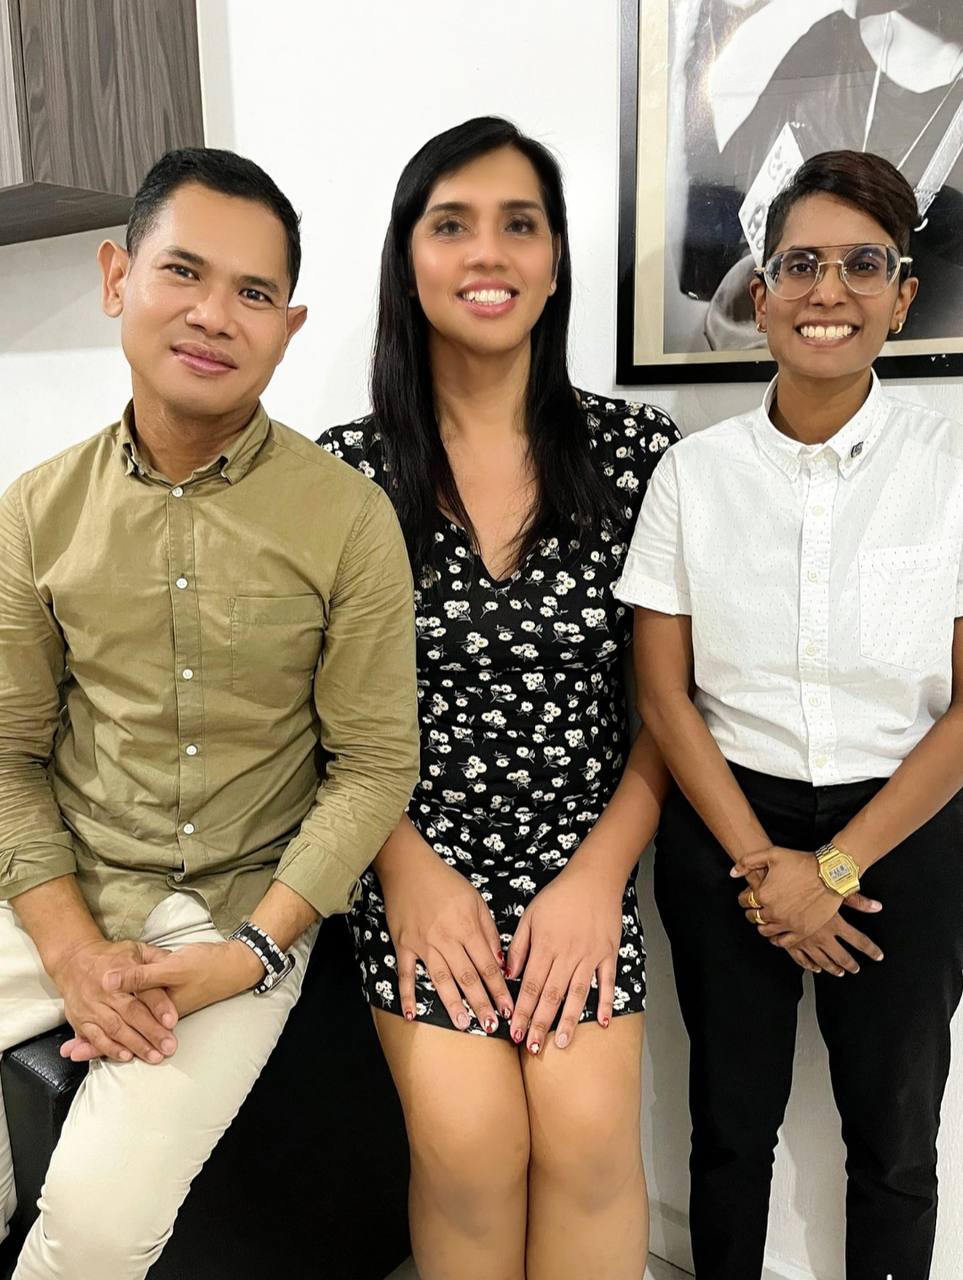 Askre, Shania, and Pereira pose for a photo together. Askre is dressed in a green long-sleeved shirt and khaki pants. Shania dons a black floral dress. Pereira is dressed in a white short-sleeved shirt and black pants.